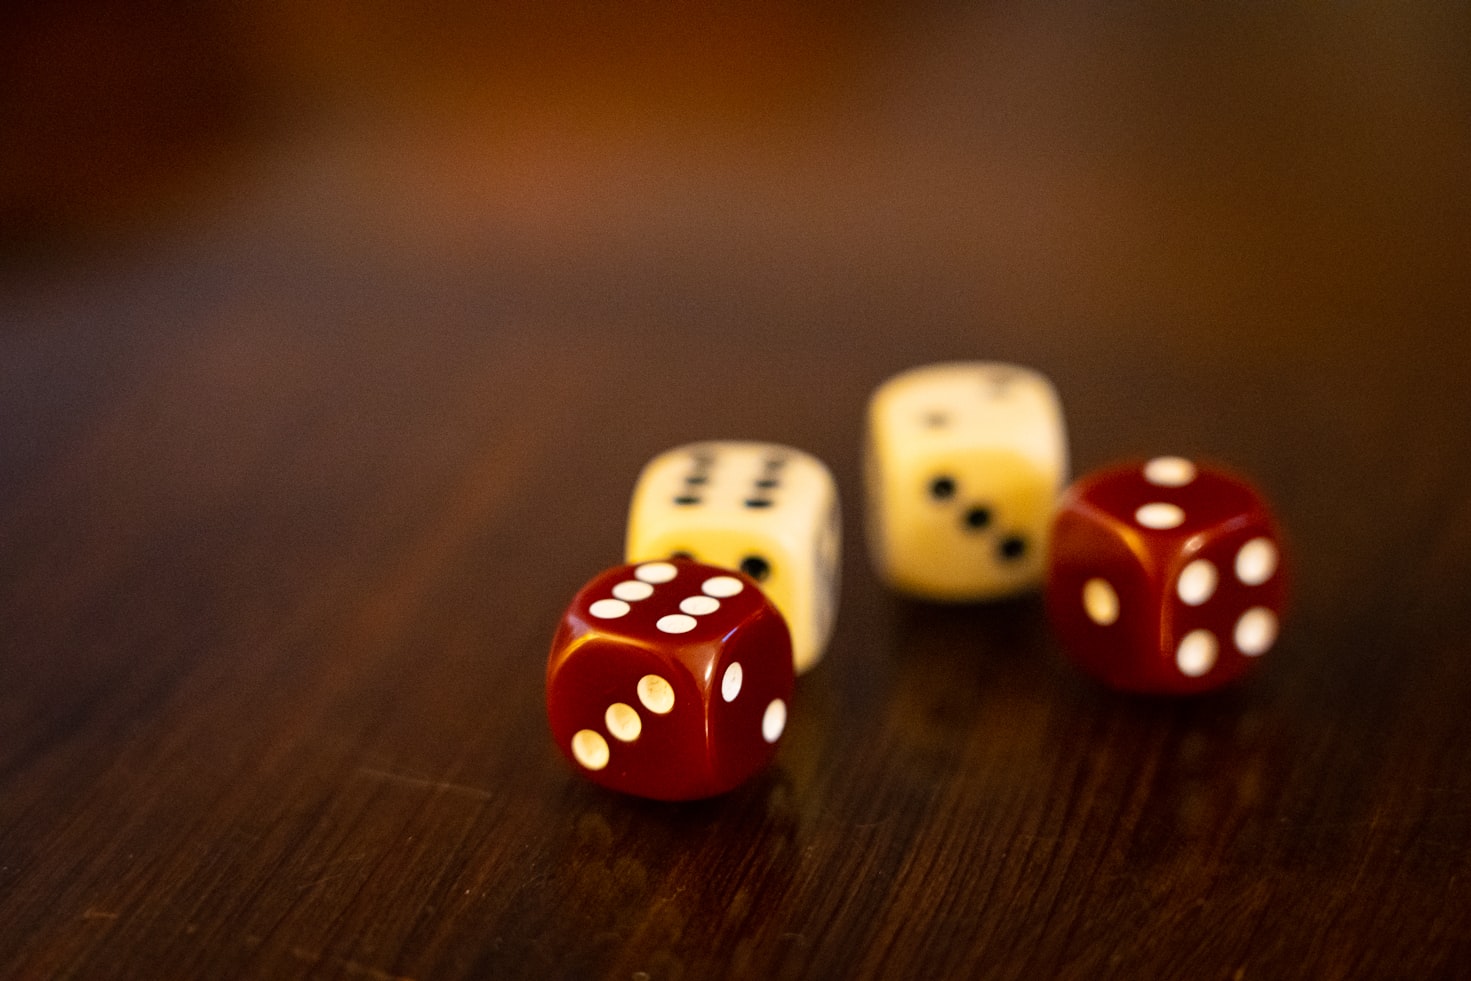 Two red dice and two white dice on a wooden table